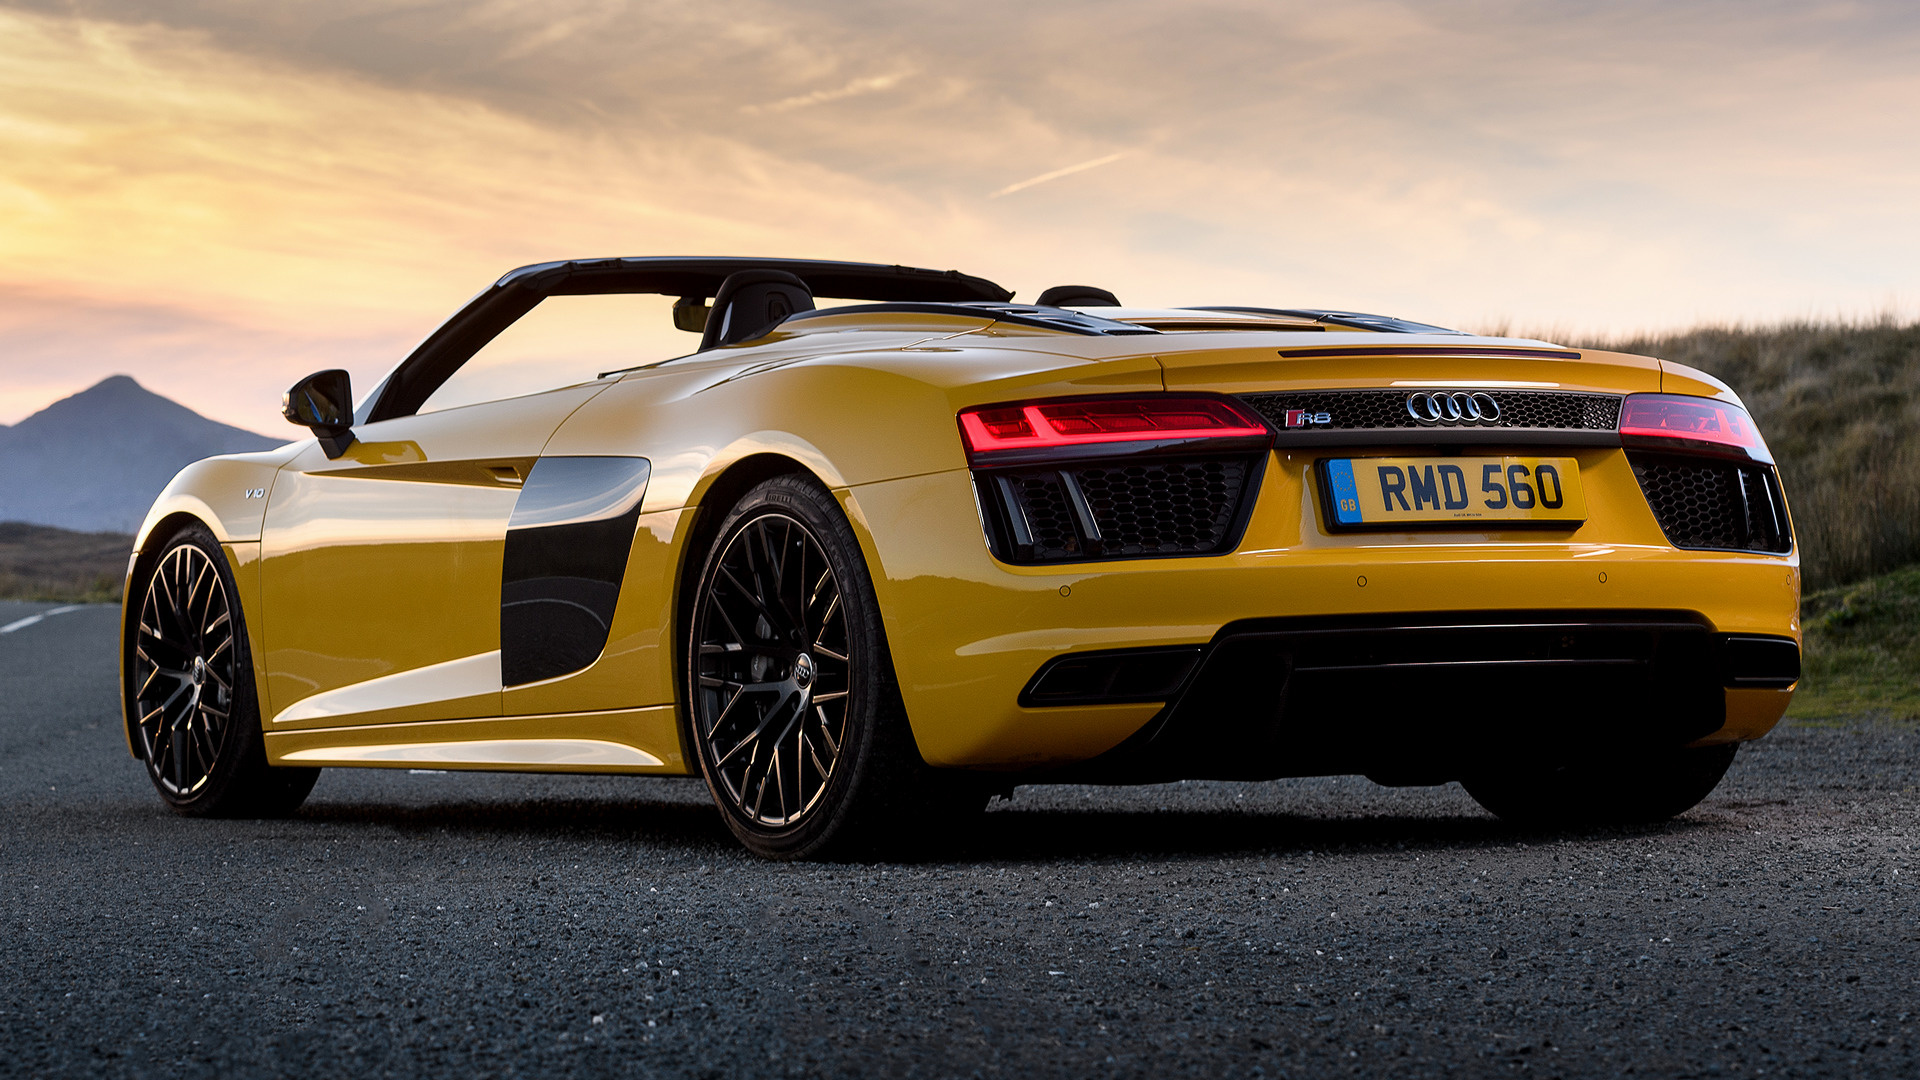 vehicles, audi r8 v10, car, roadster, yellow car, audi cell phone wallpapers